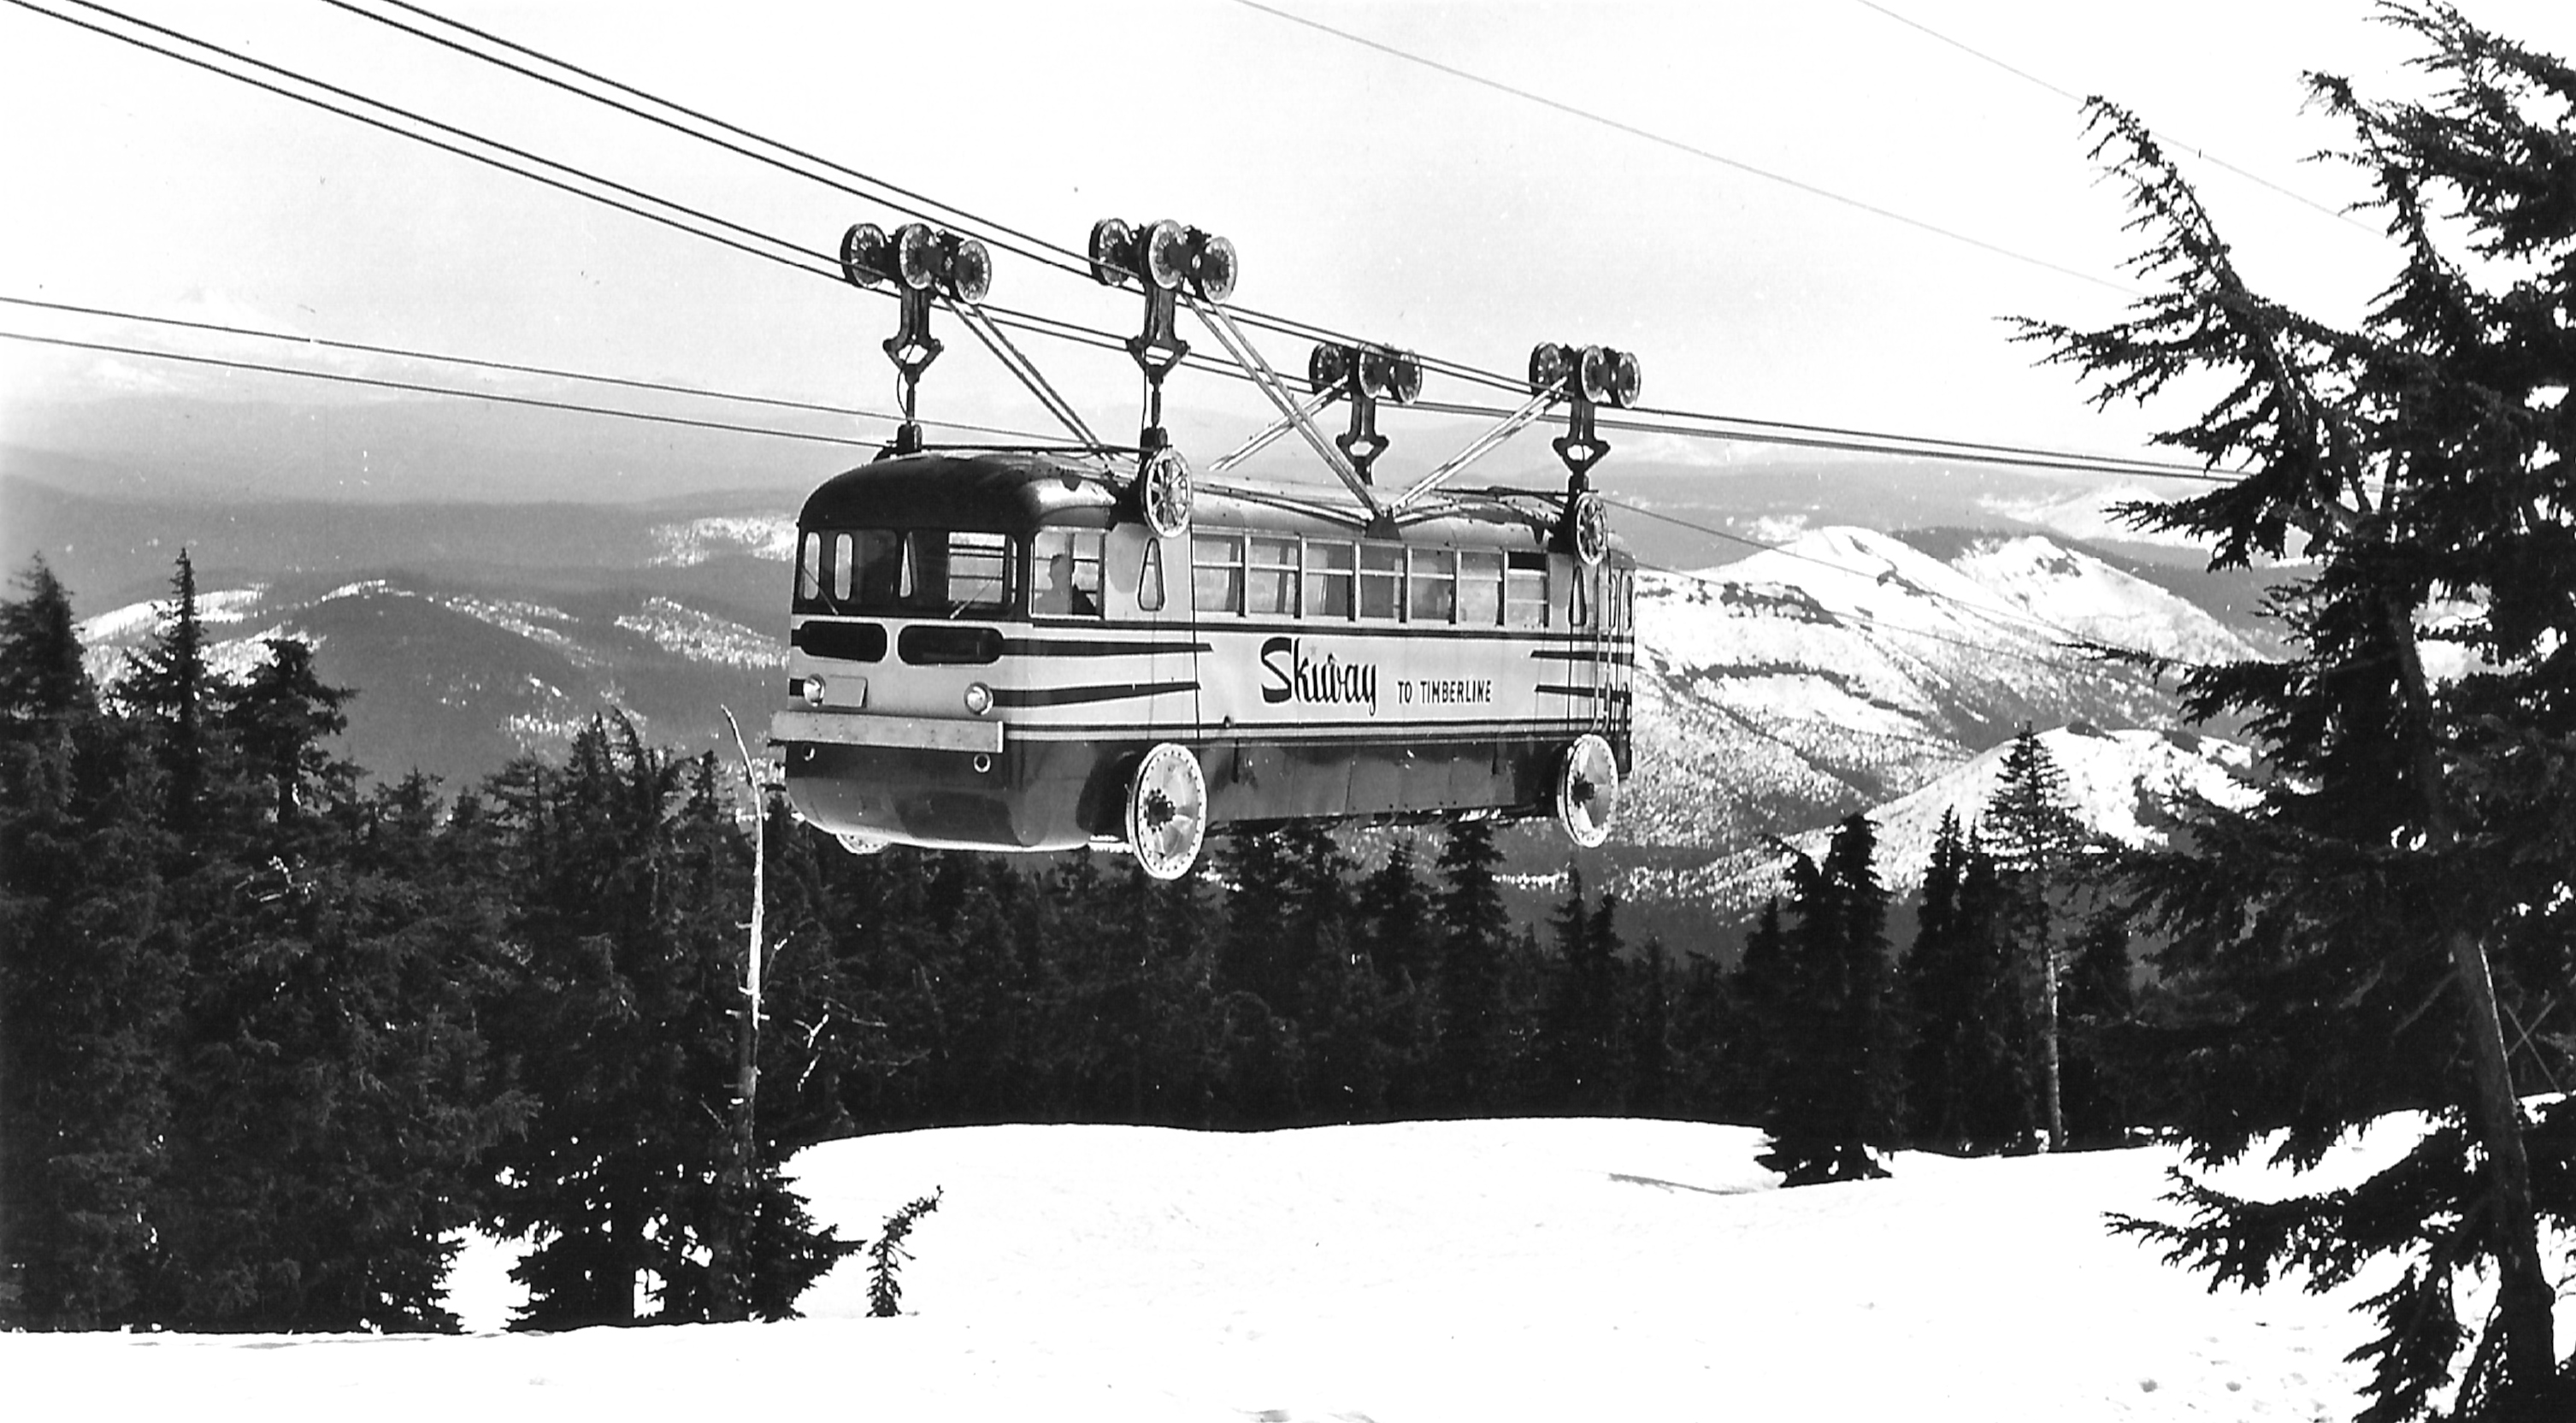 City Bus Turned Ski Lift- A Look Into The Most Unique Ski Lift Ever